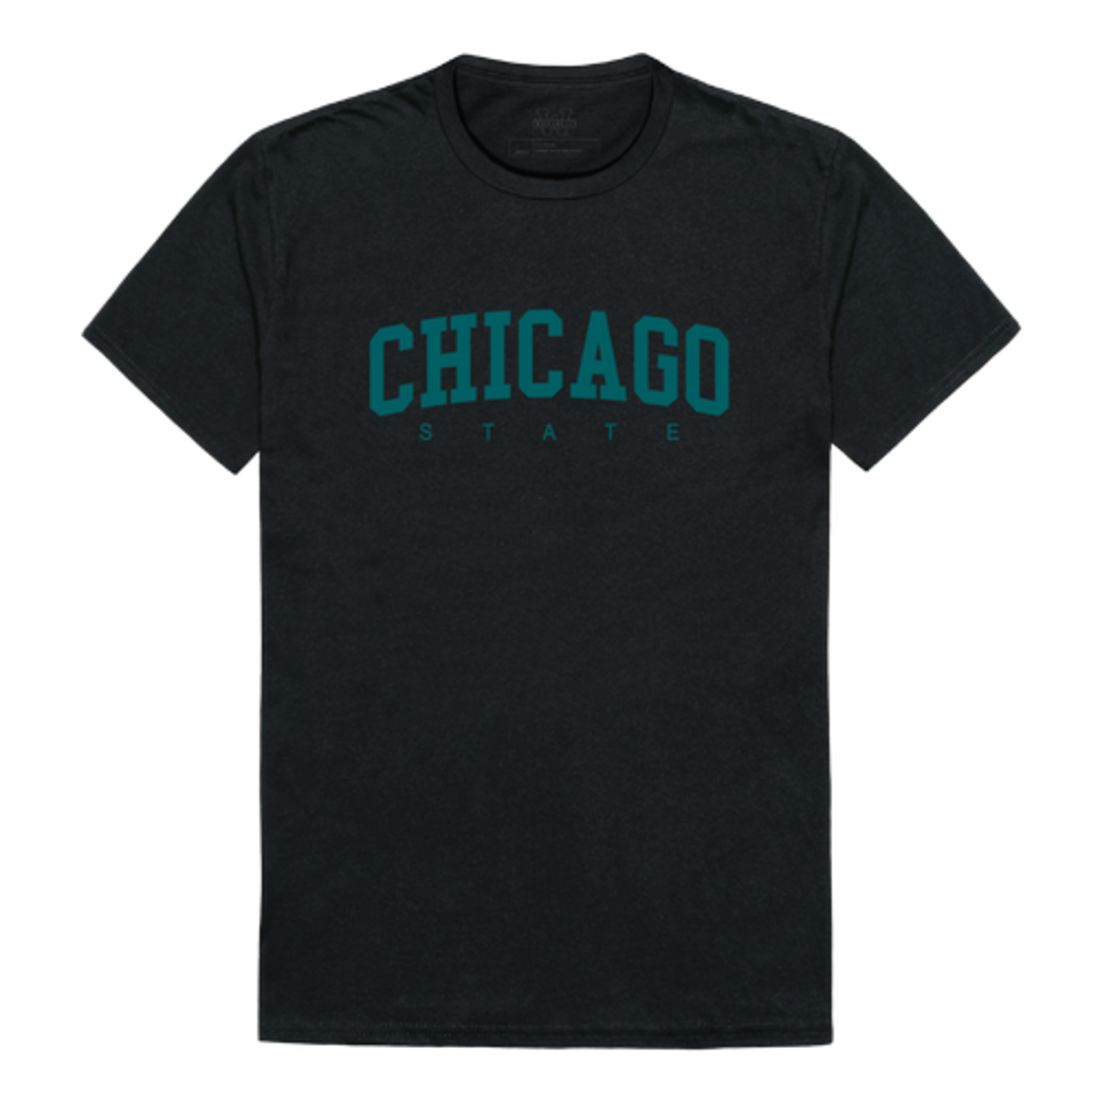 Chicago State University Cougars Collegiate T-Shirt Tee